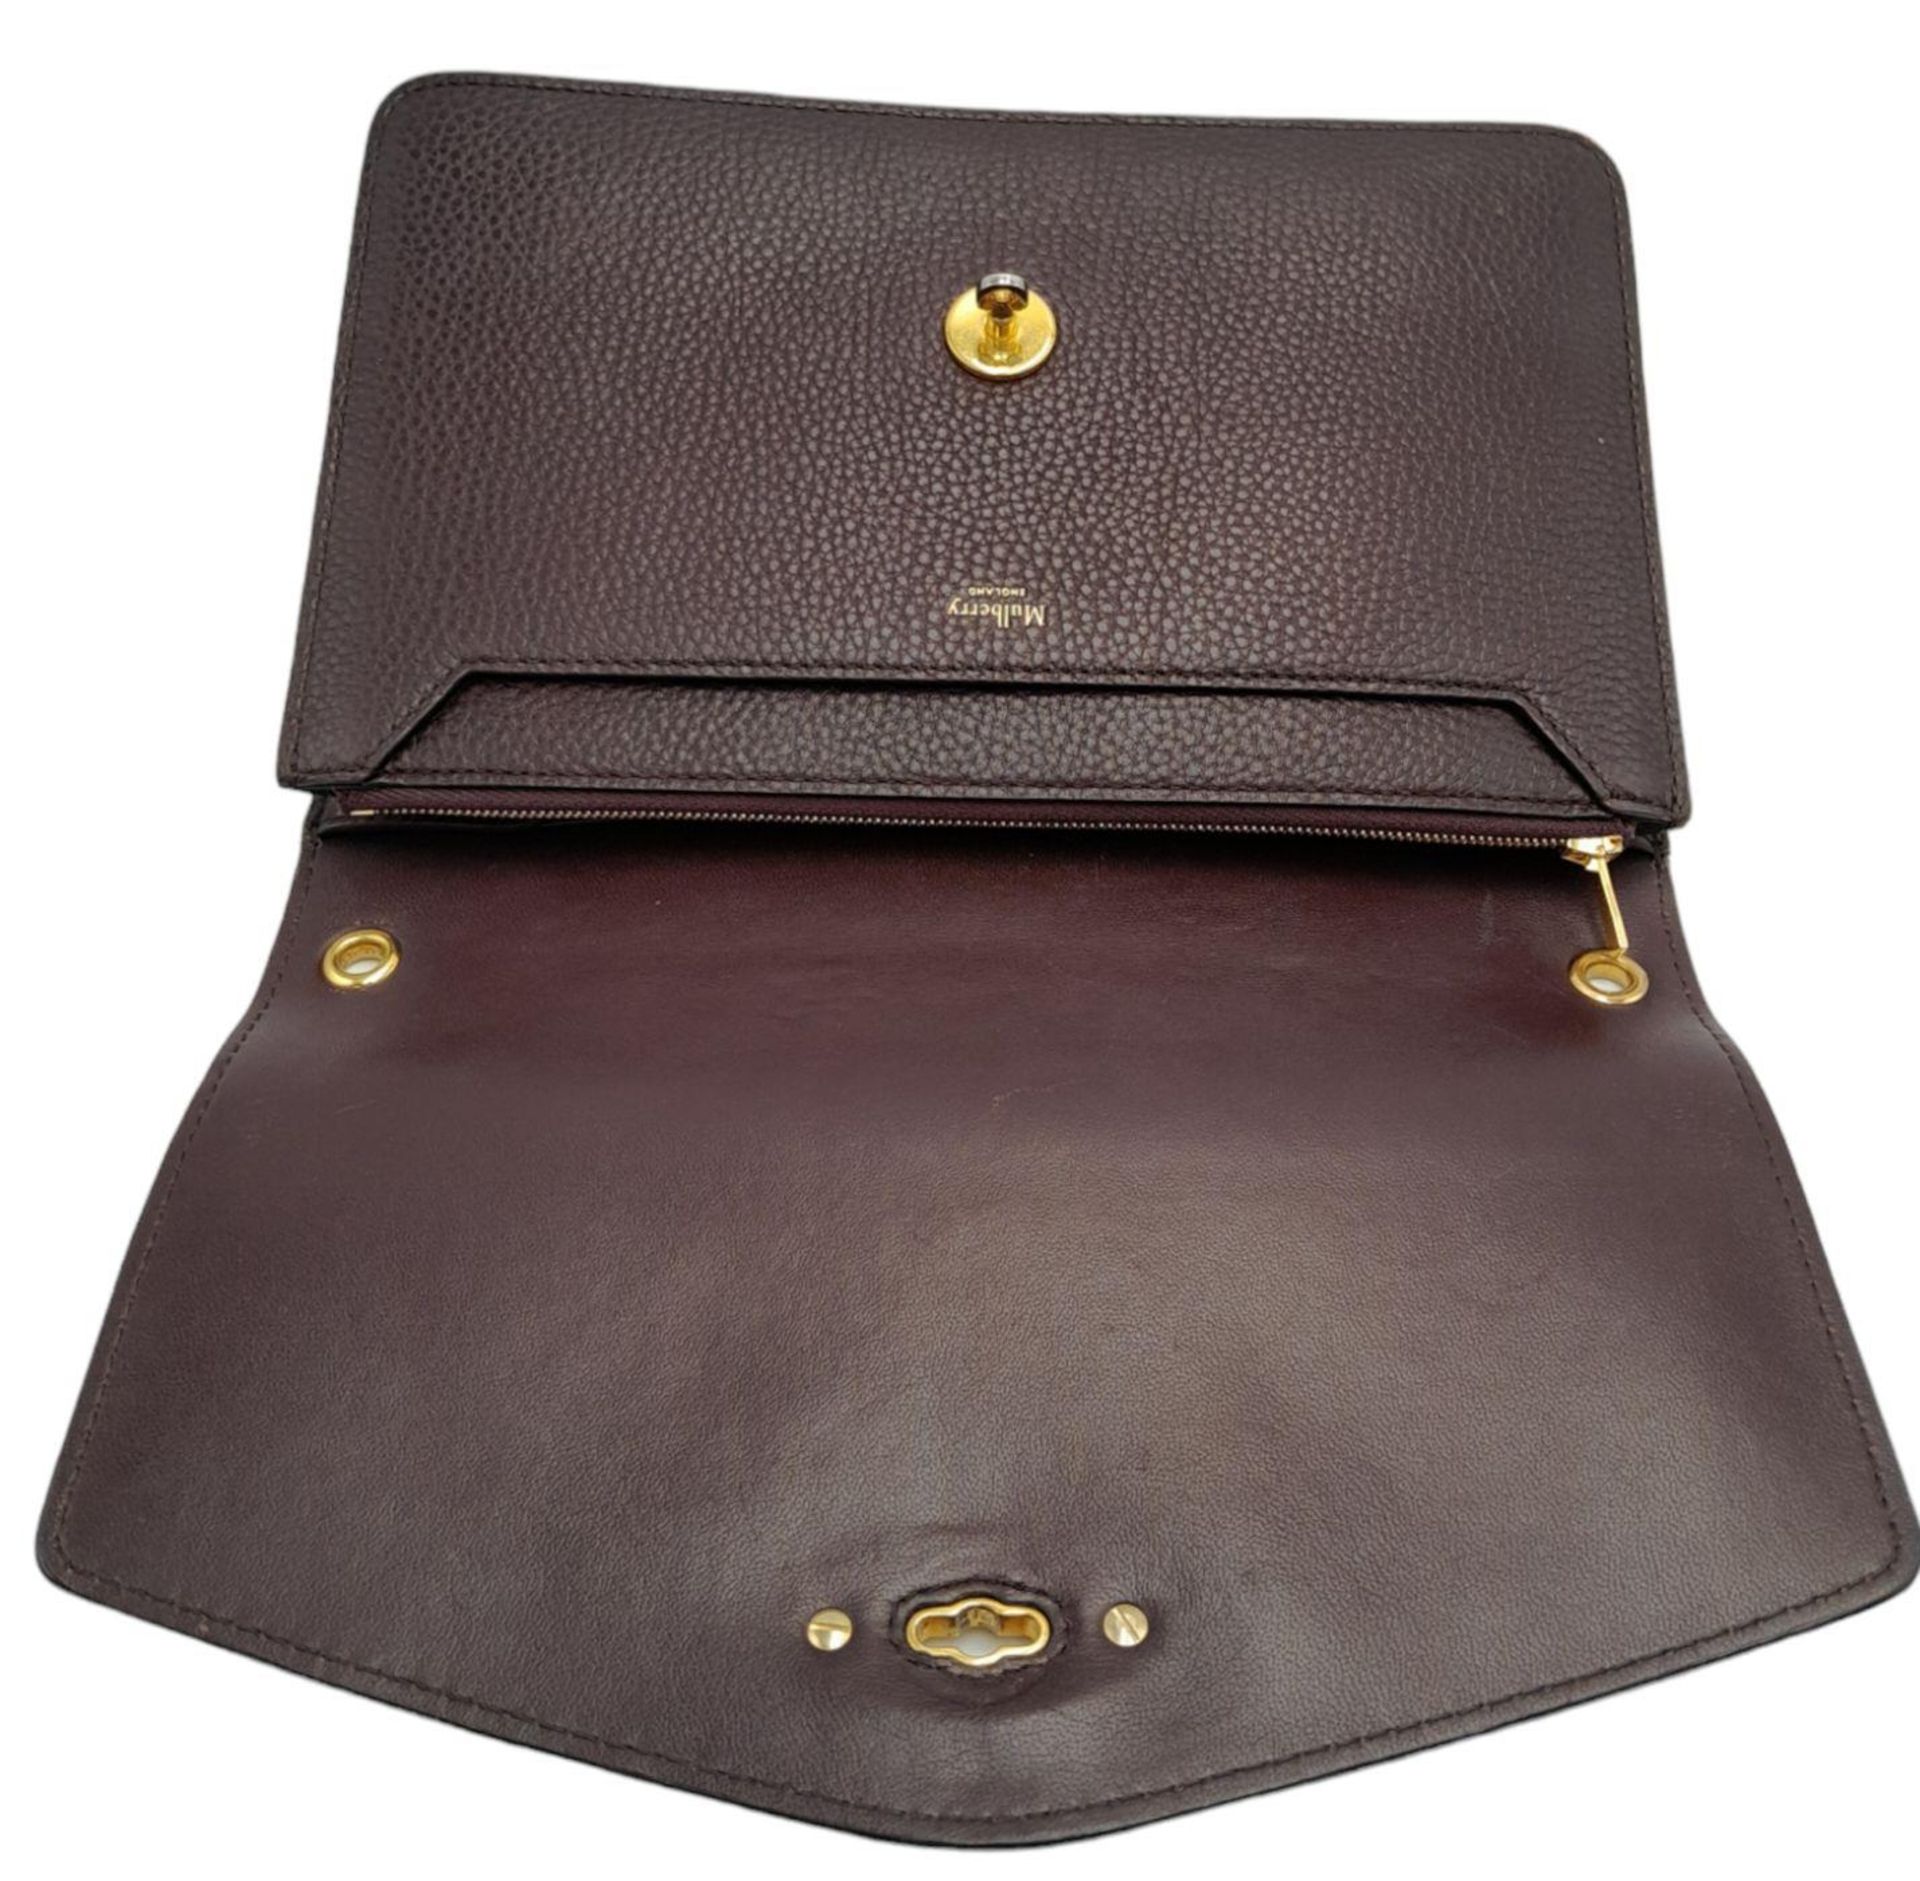 A Mulberry Oxblood Darley Bag. Leather exterior with gold-toned hardware and twist lock closure. - Bild 3 aus 10